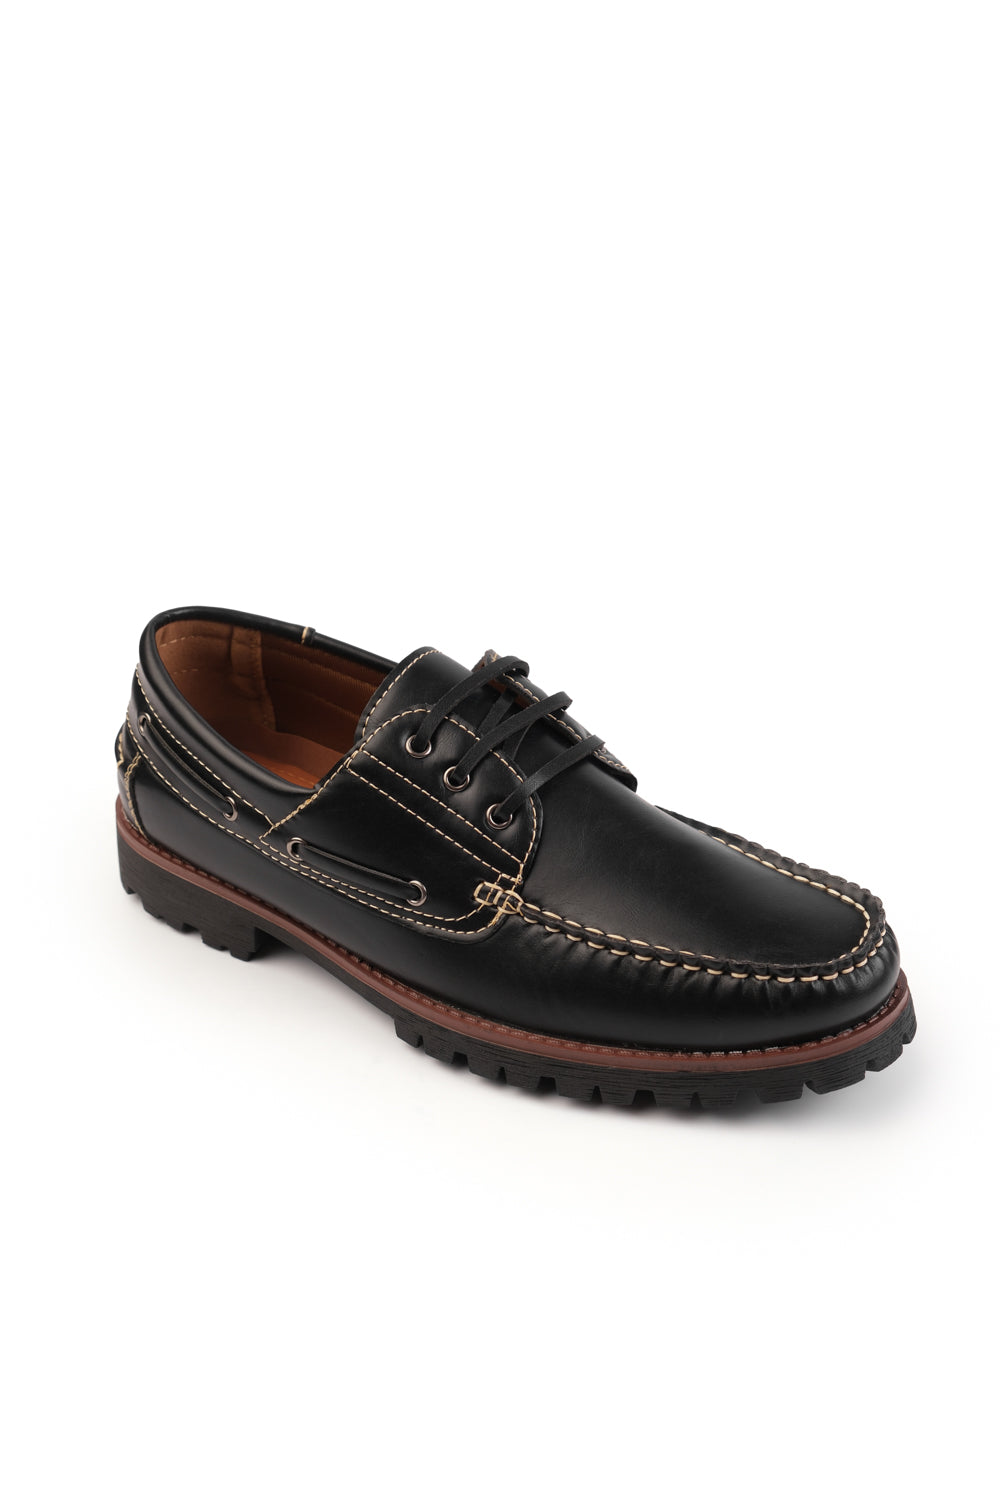 ISAAC CHUNKY BOAT SHOES IN BLACK